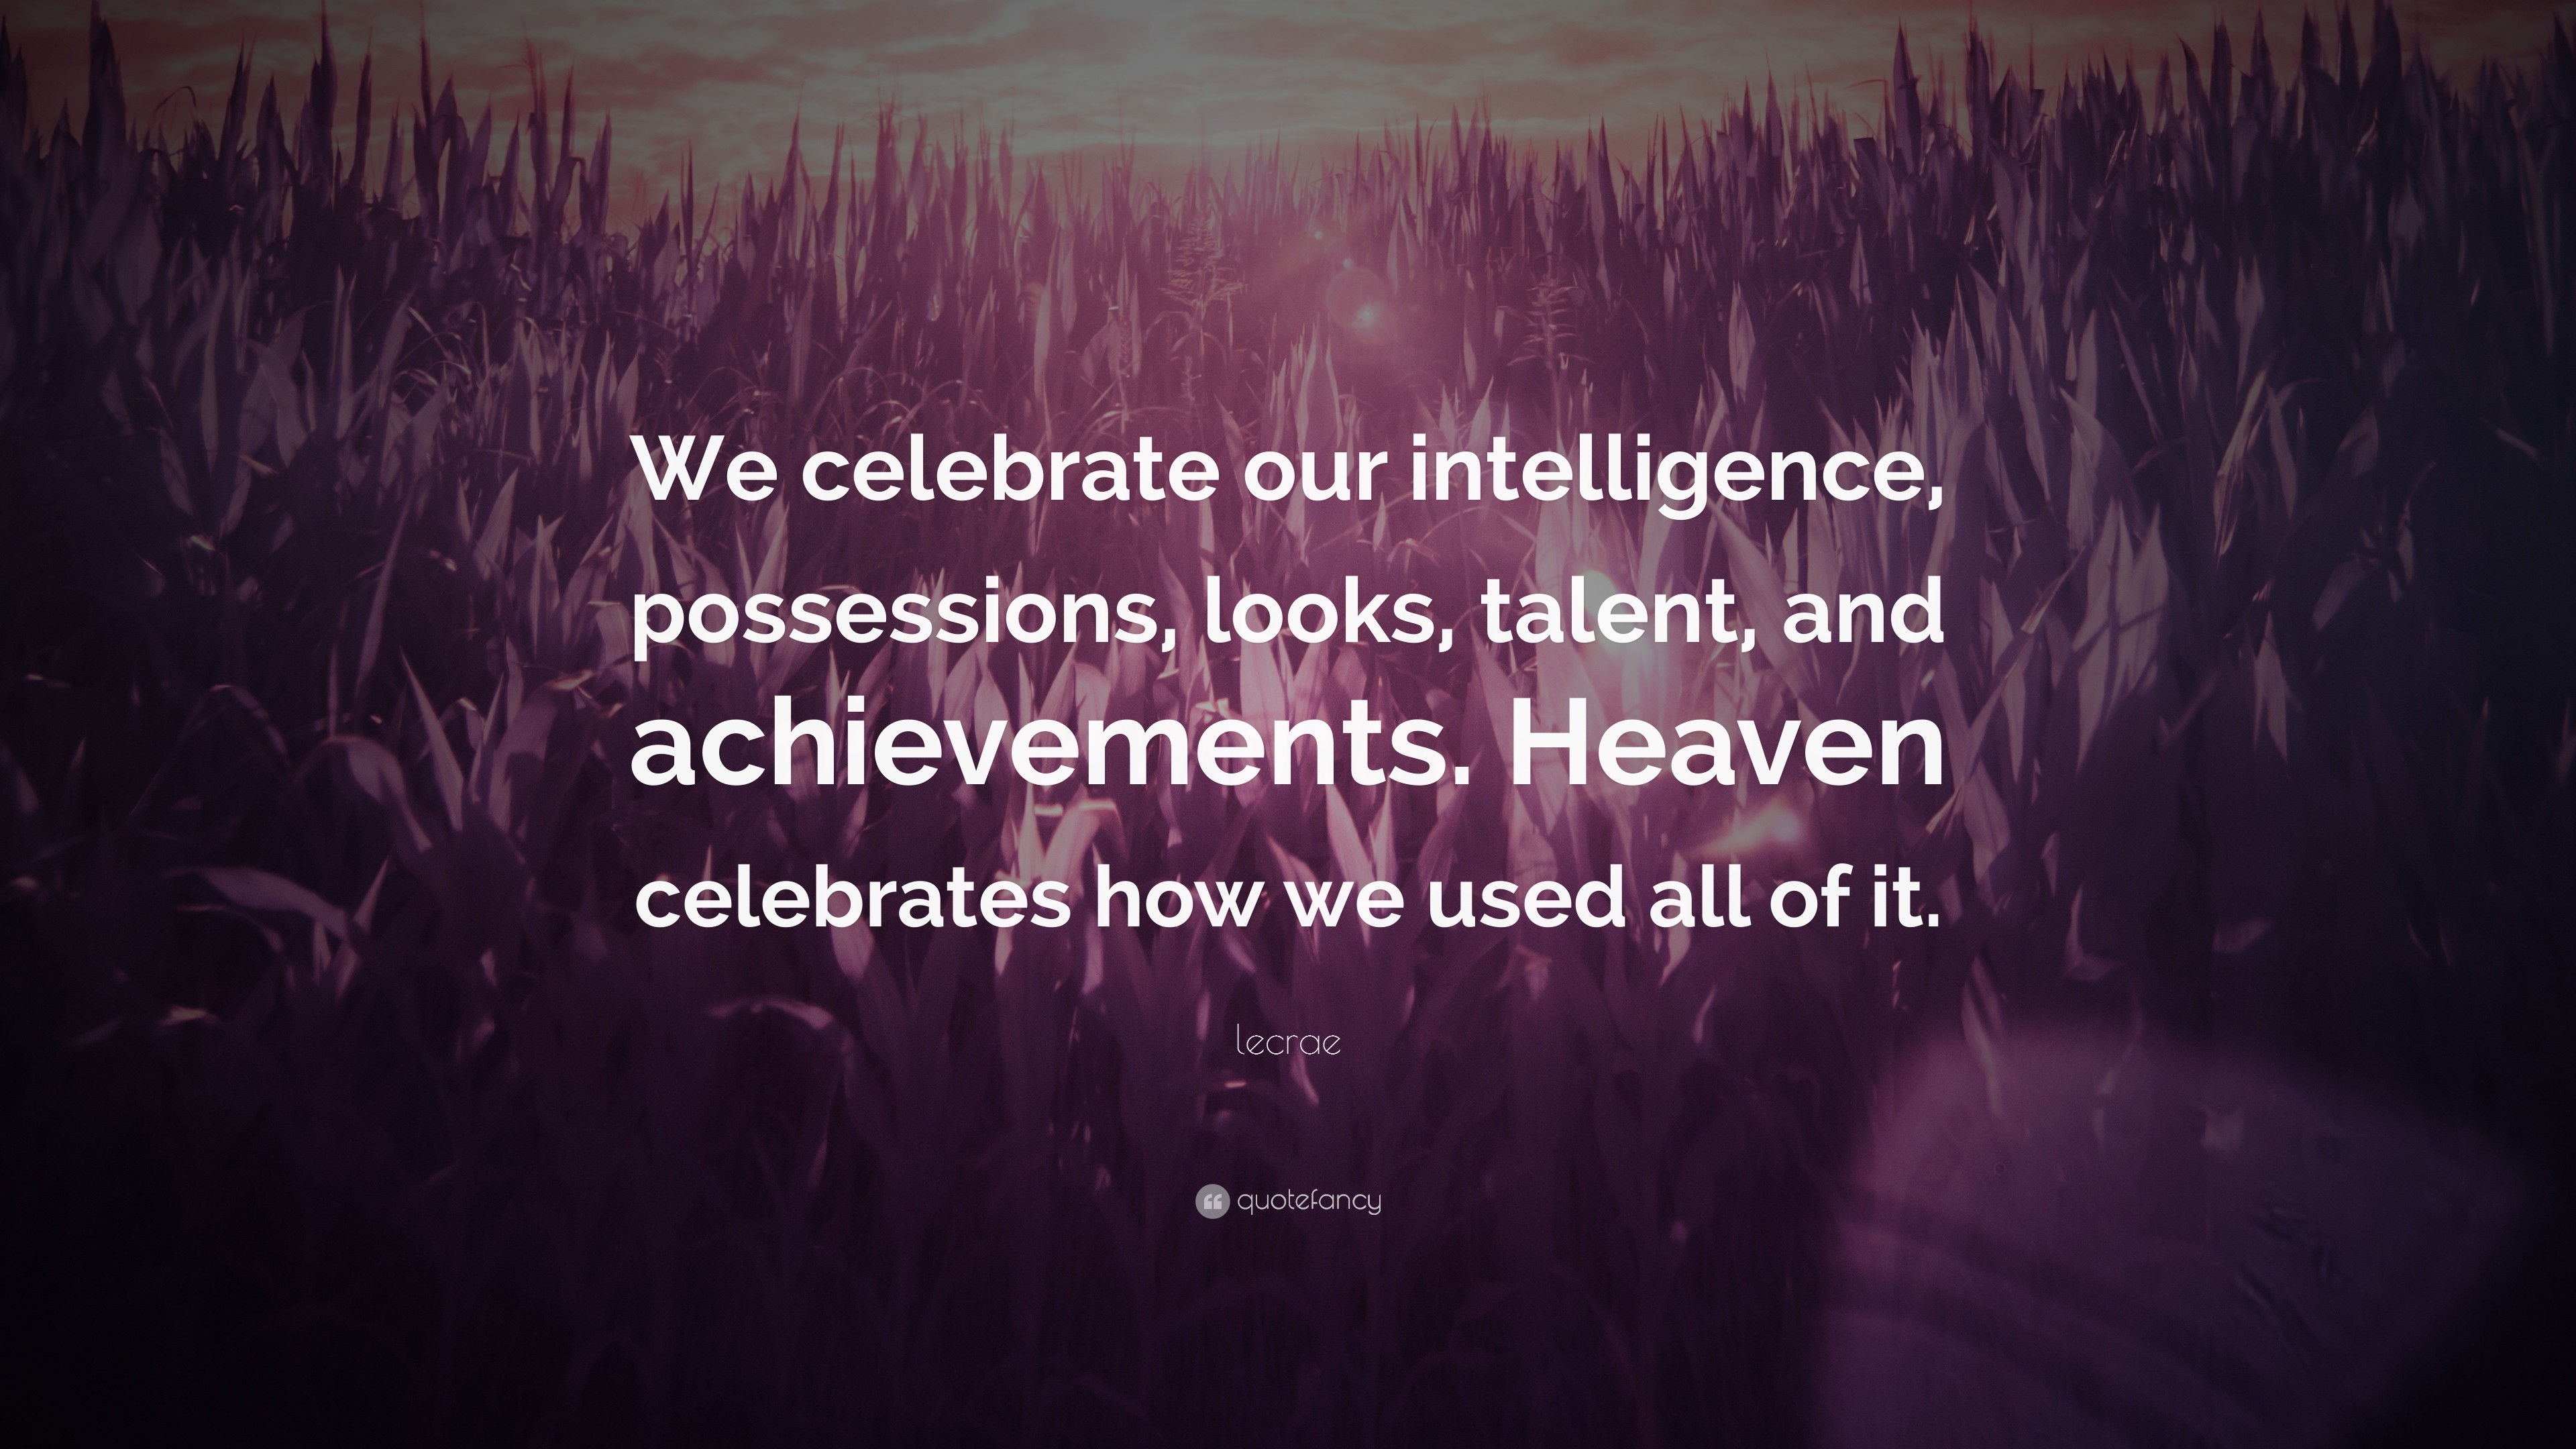 3840x2160 Lecrae Quote: “We celebrate our intelligence, possessions, looks, talent,  and